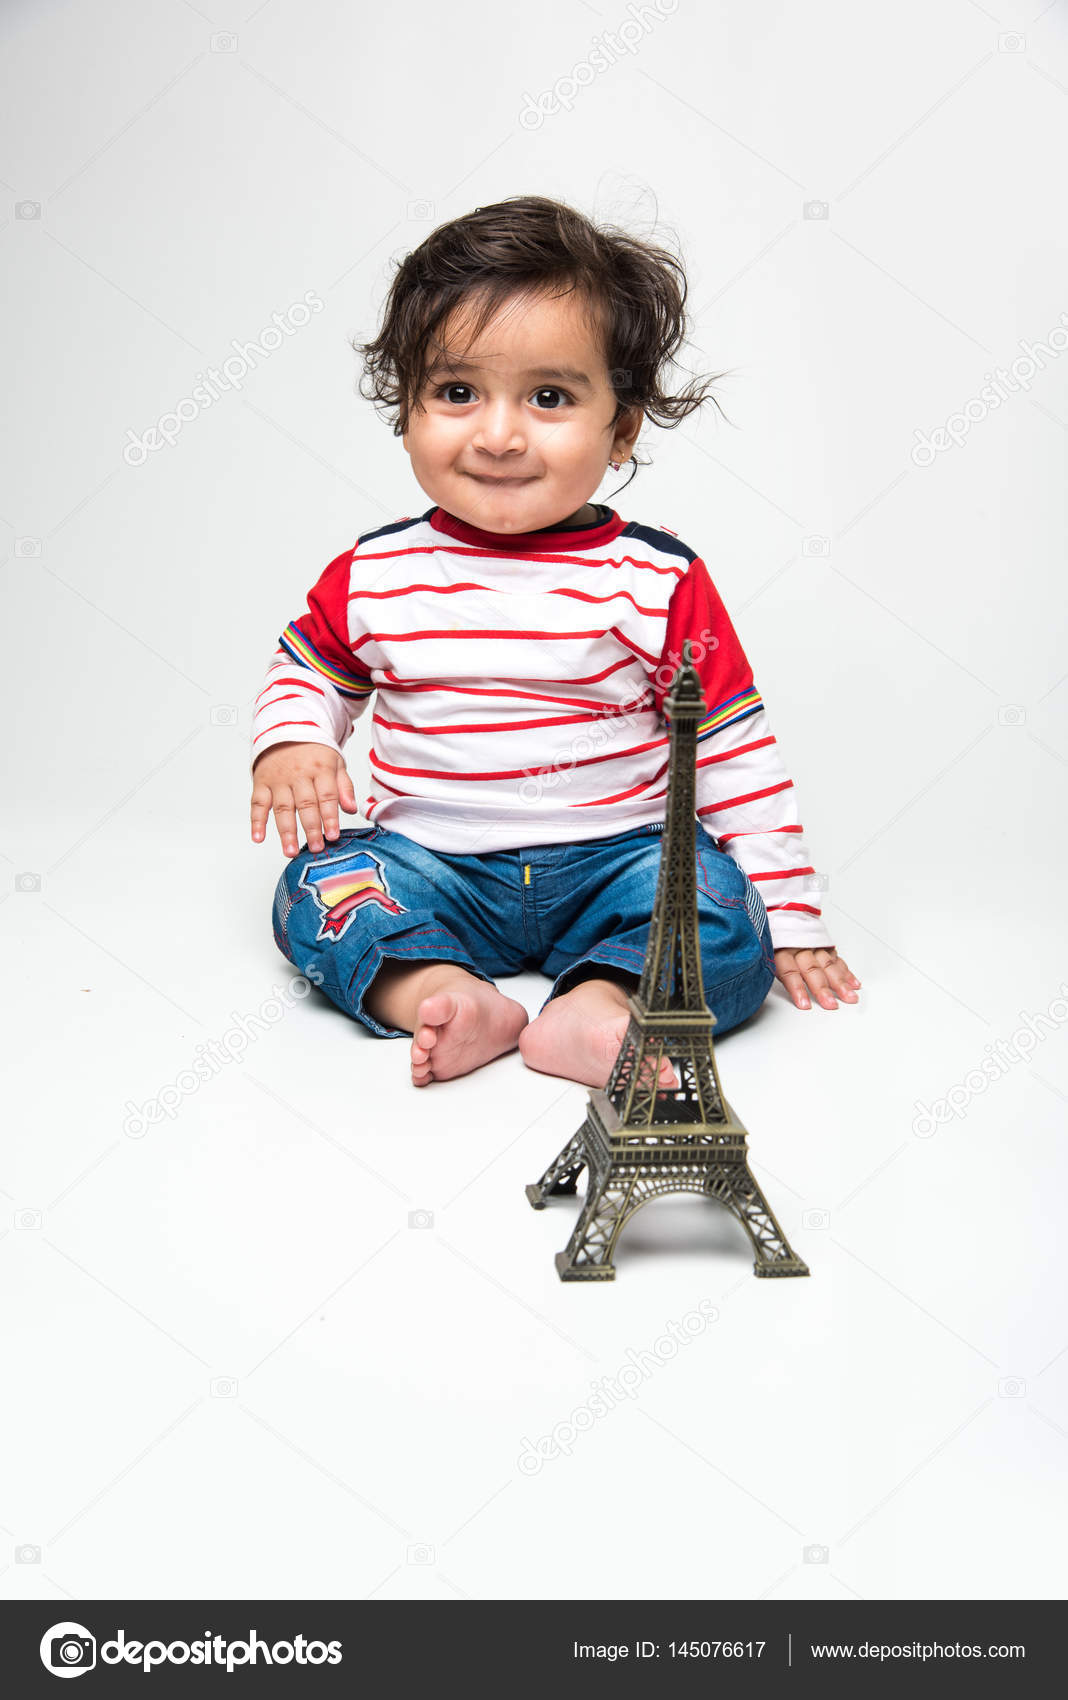 Indian Baby Boy With Long Hair Sitting Over White Background With Toy Model Or Replica Of Eiffel Tower Stock Photo C Stockimagefactory Com 145076617